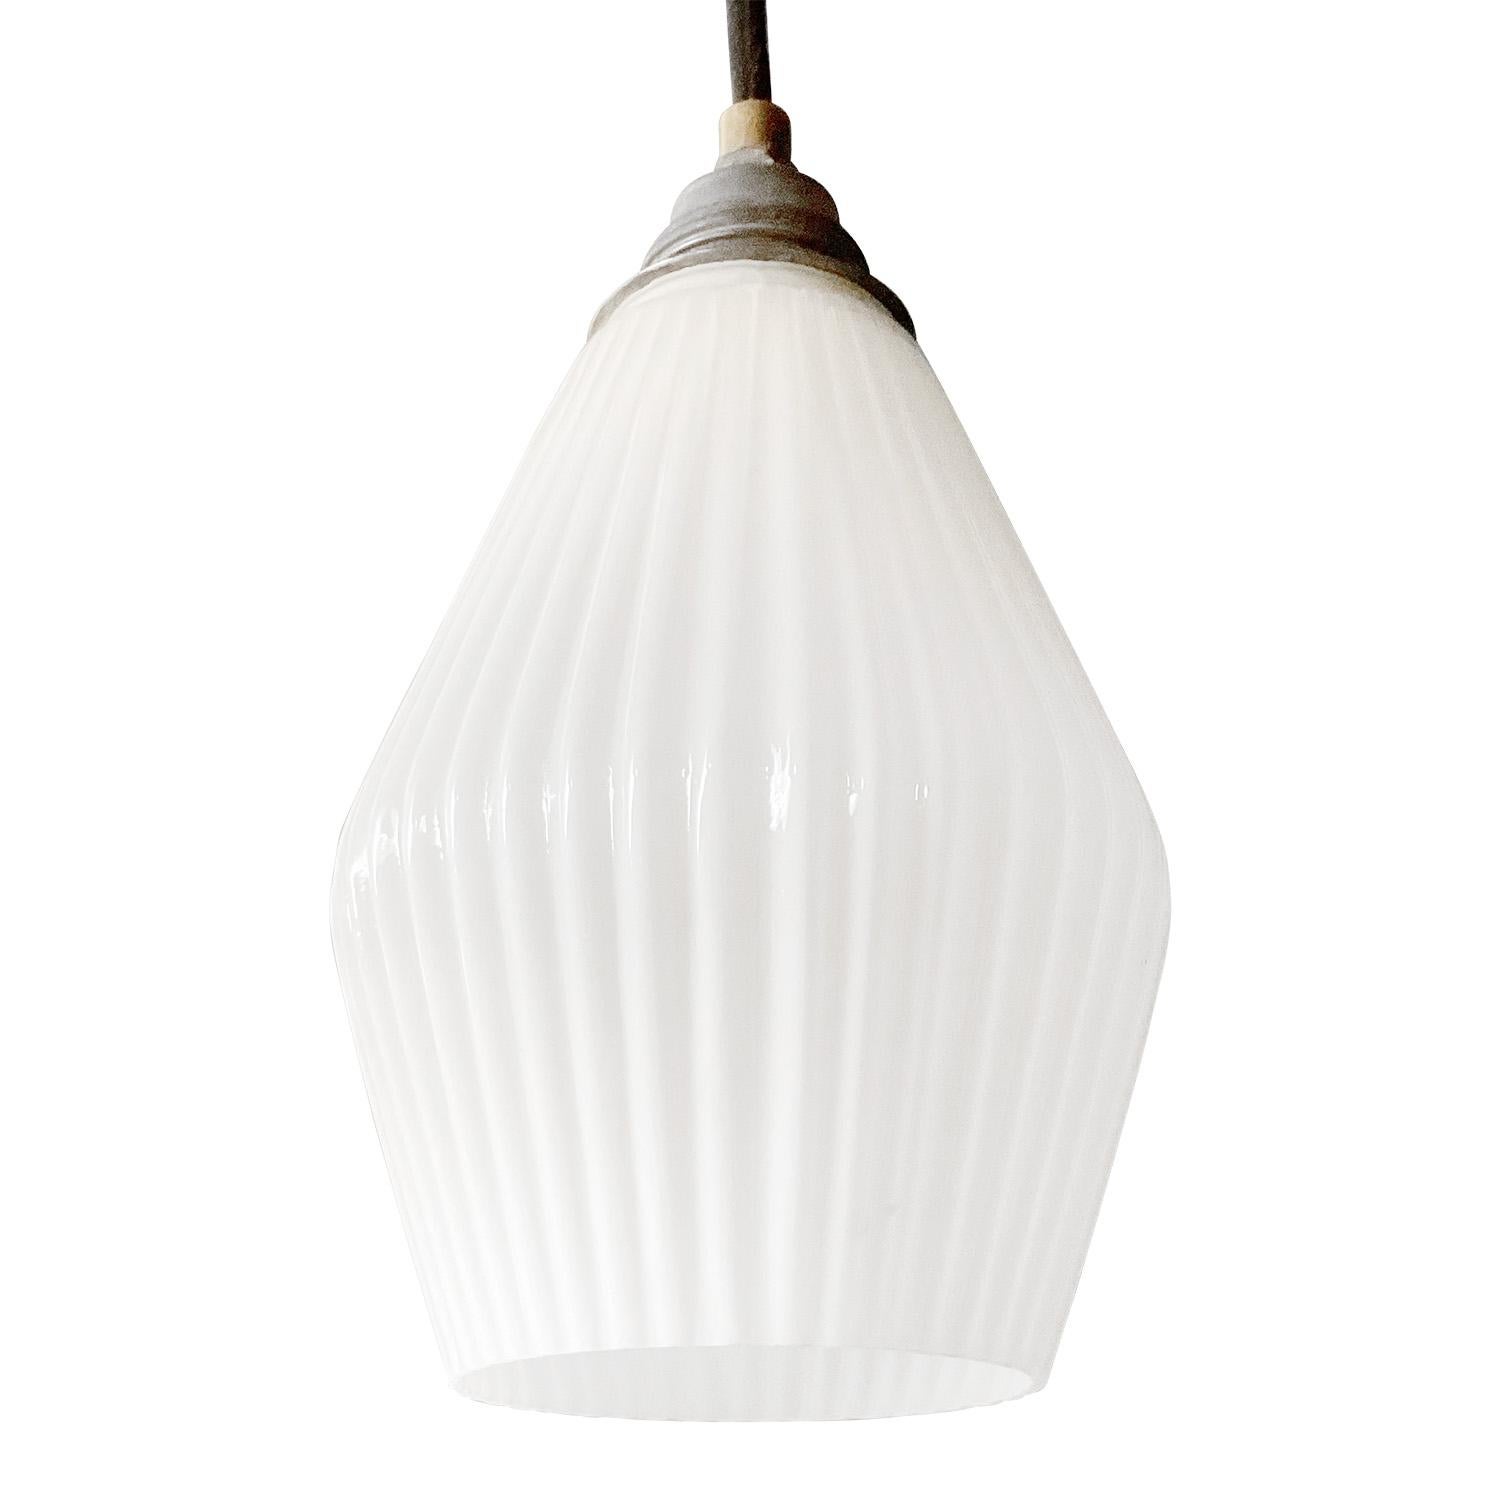 Opaline glass pendant.
2 meter black wire.

Measure: weight 0.80 kg / 1.8 lb.

Priced per individual item. All lamps have been made suitable by international standards for incandescent light bulbs, energy-efficient and LED bulbs. E26 / E27 bulb